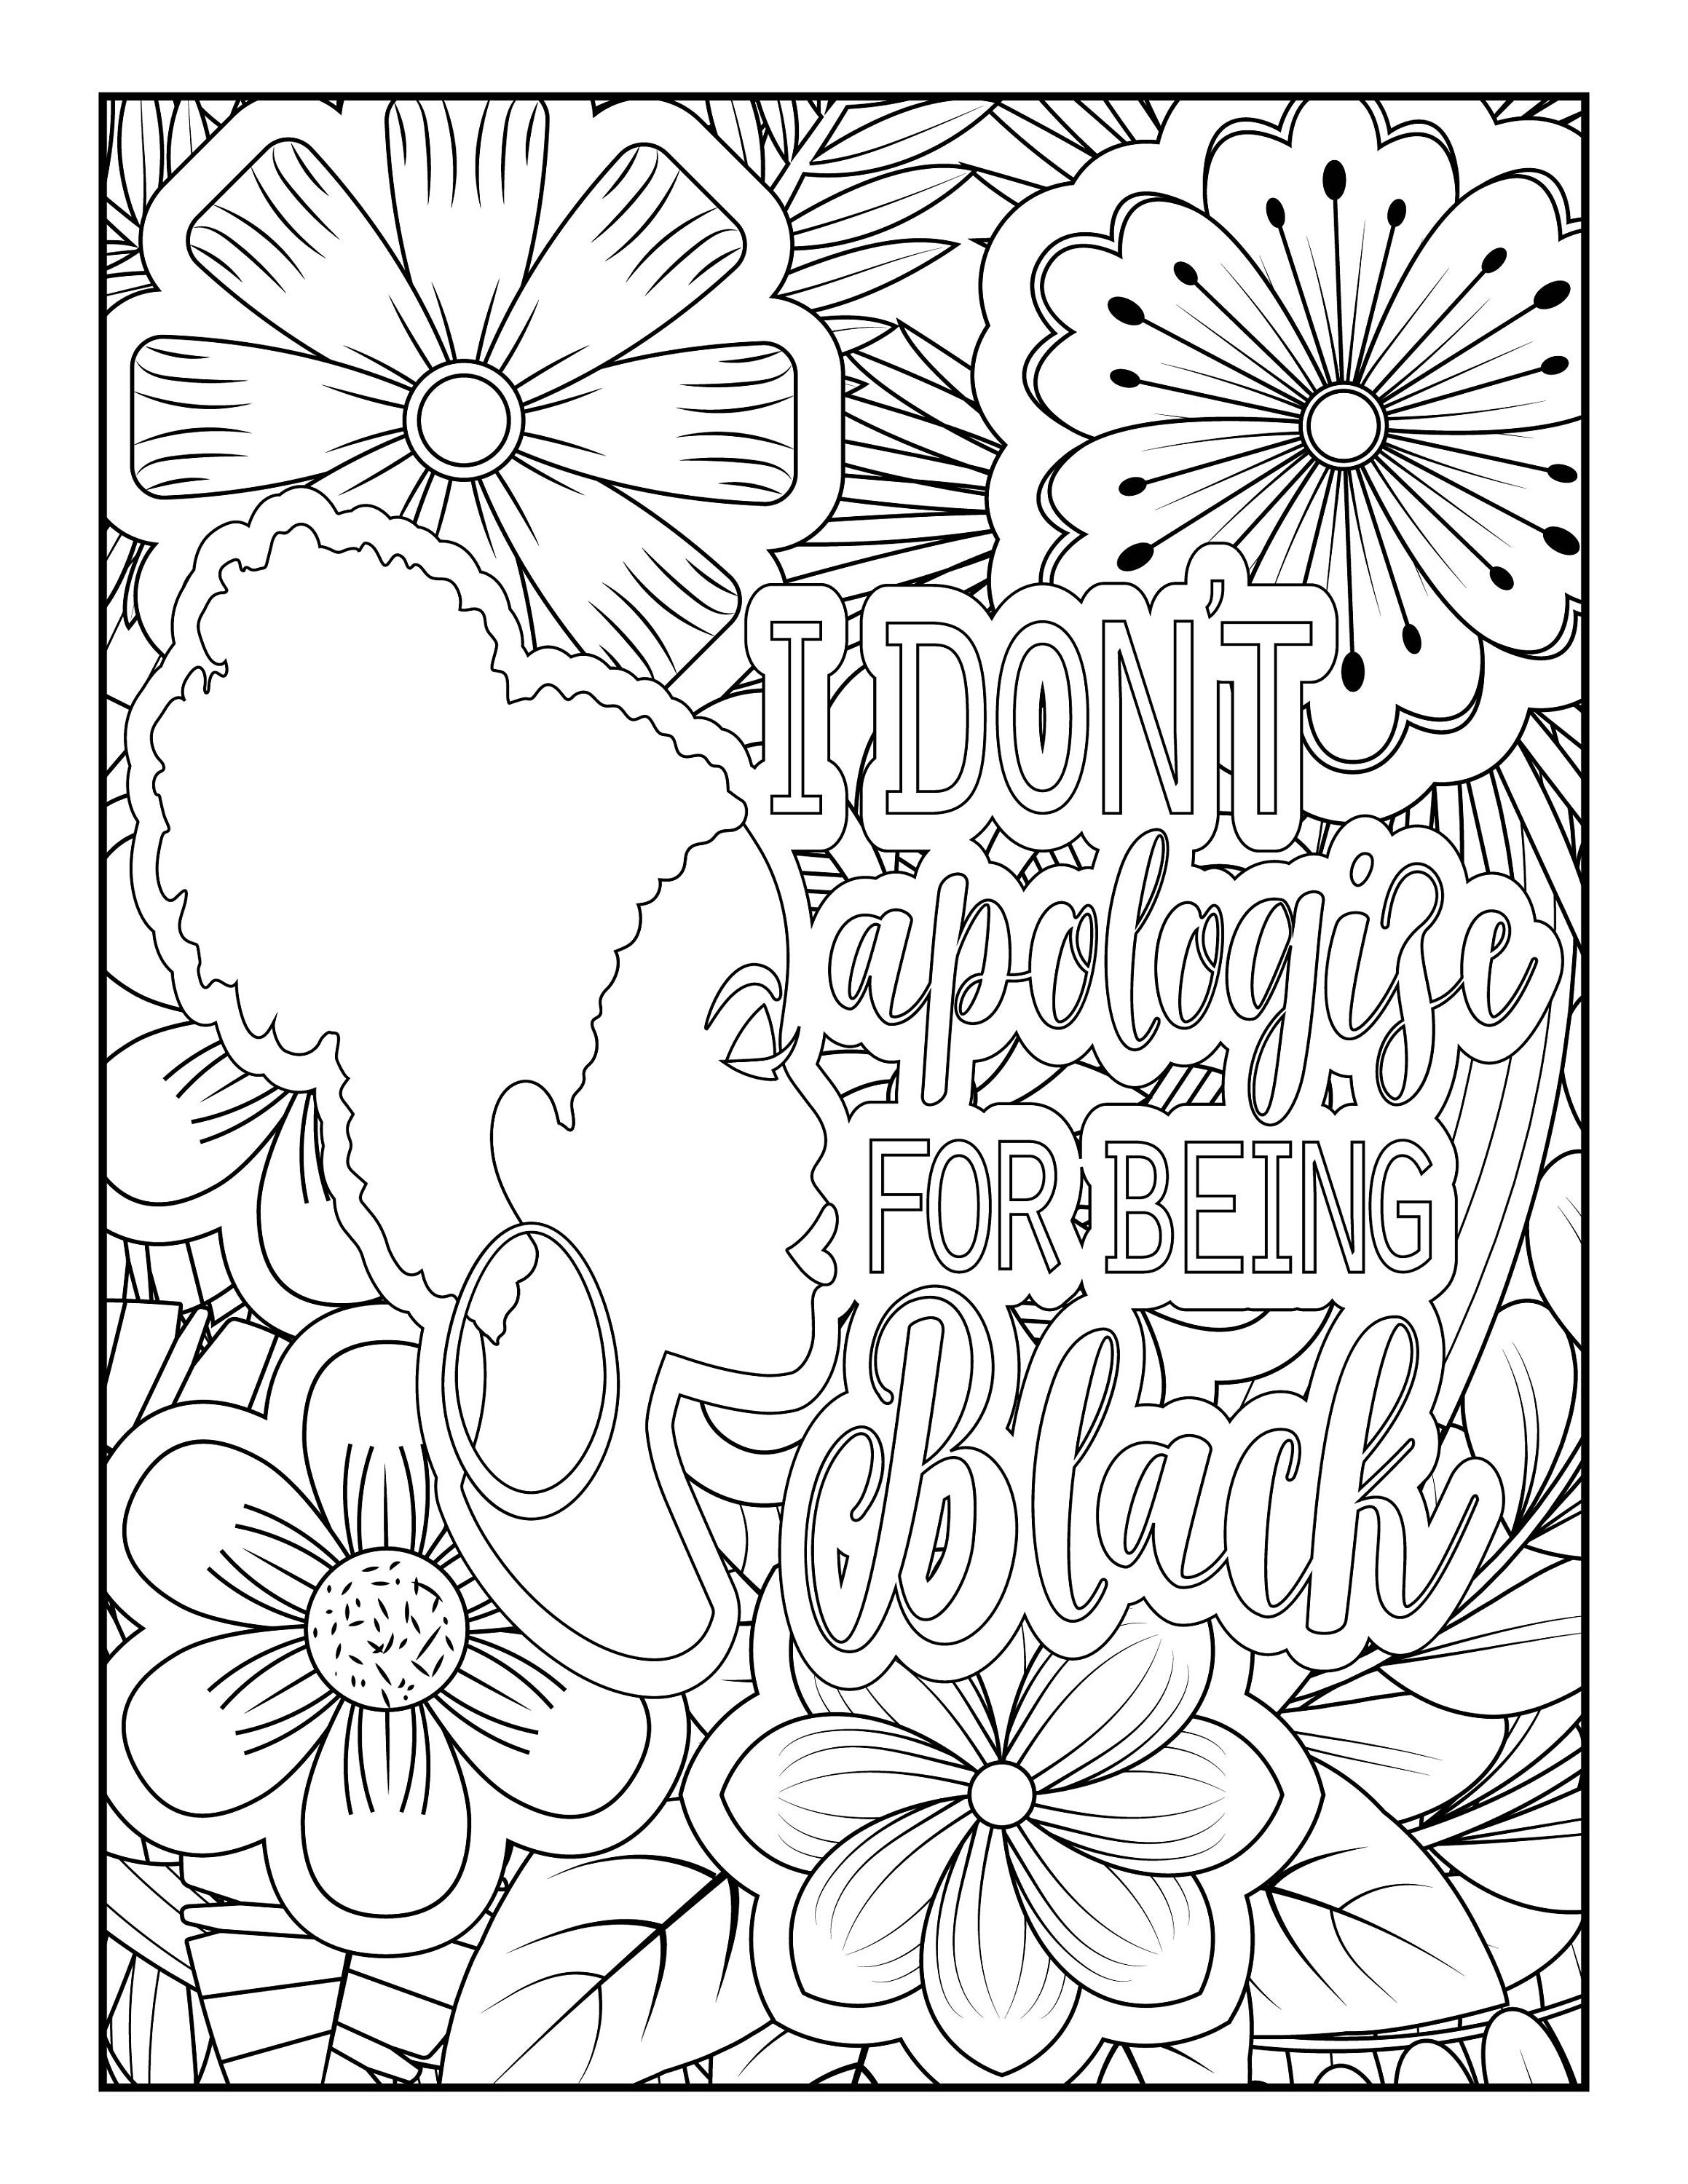 Black Woman Coloring Book for Teens: Afro Woman Coloring Book Teen  Inspirational Coloring Books with Inspirational and Motivational Quotes and  Sayings a book by Ana Publishing